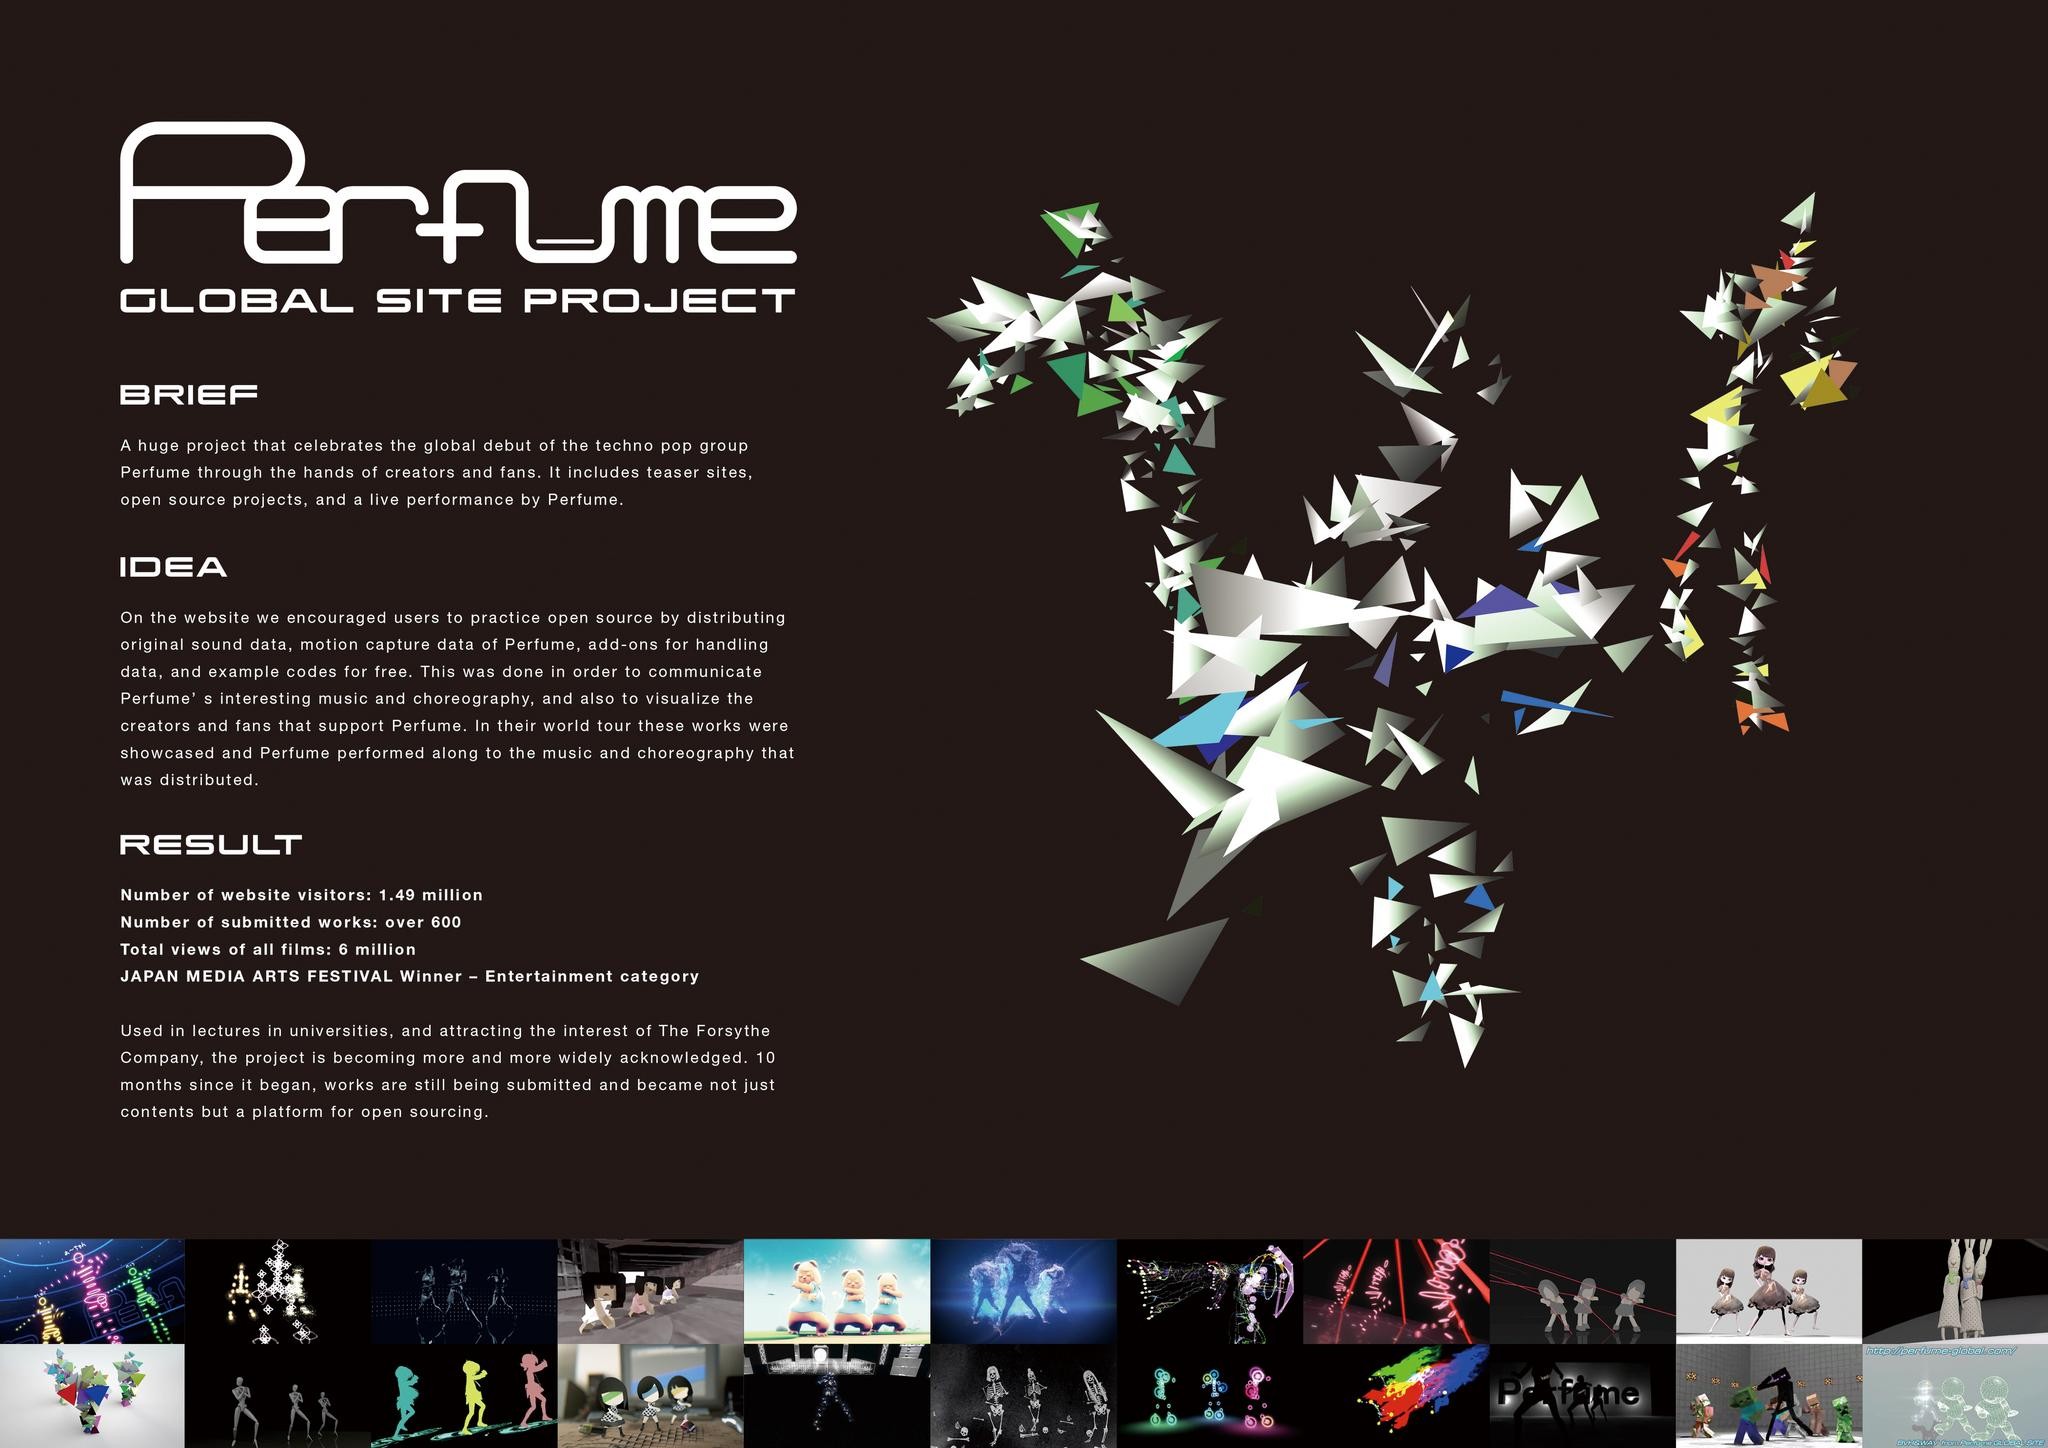 PERFUME GLOBAL SITE PROJECT